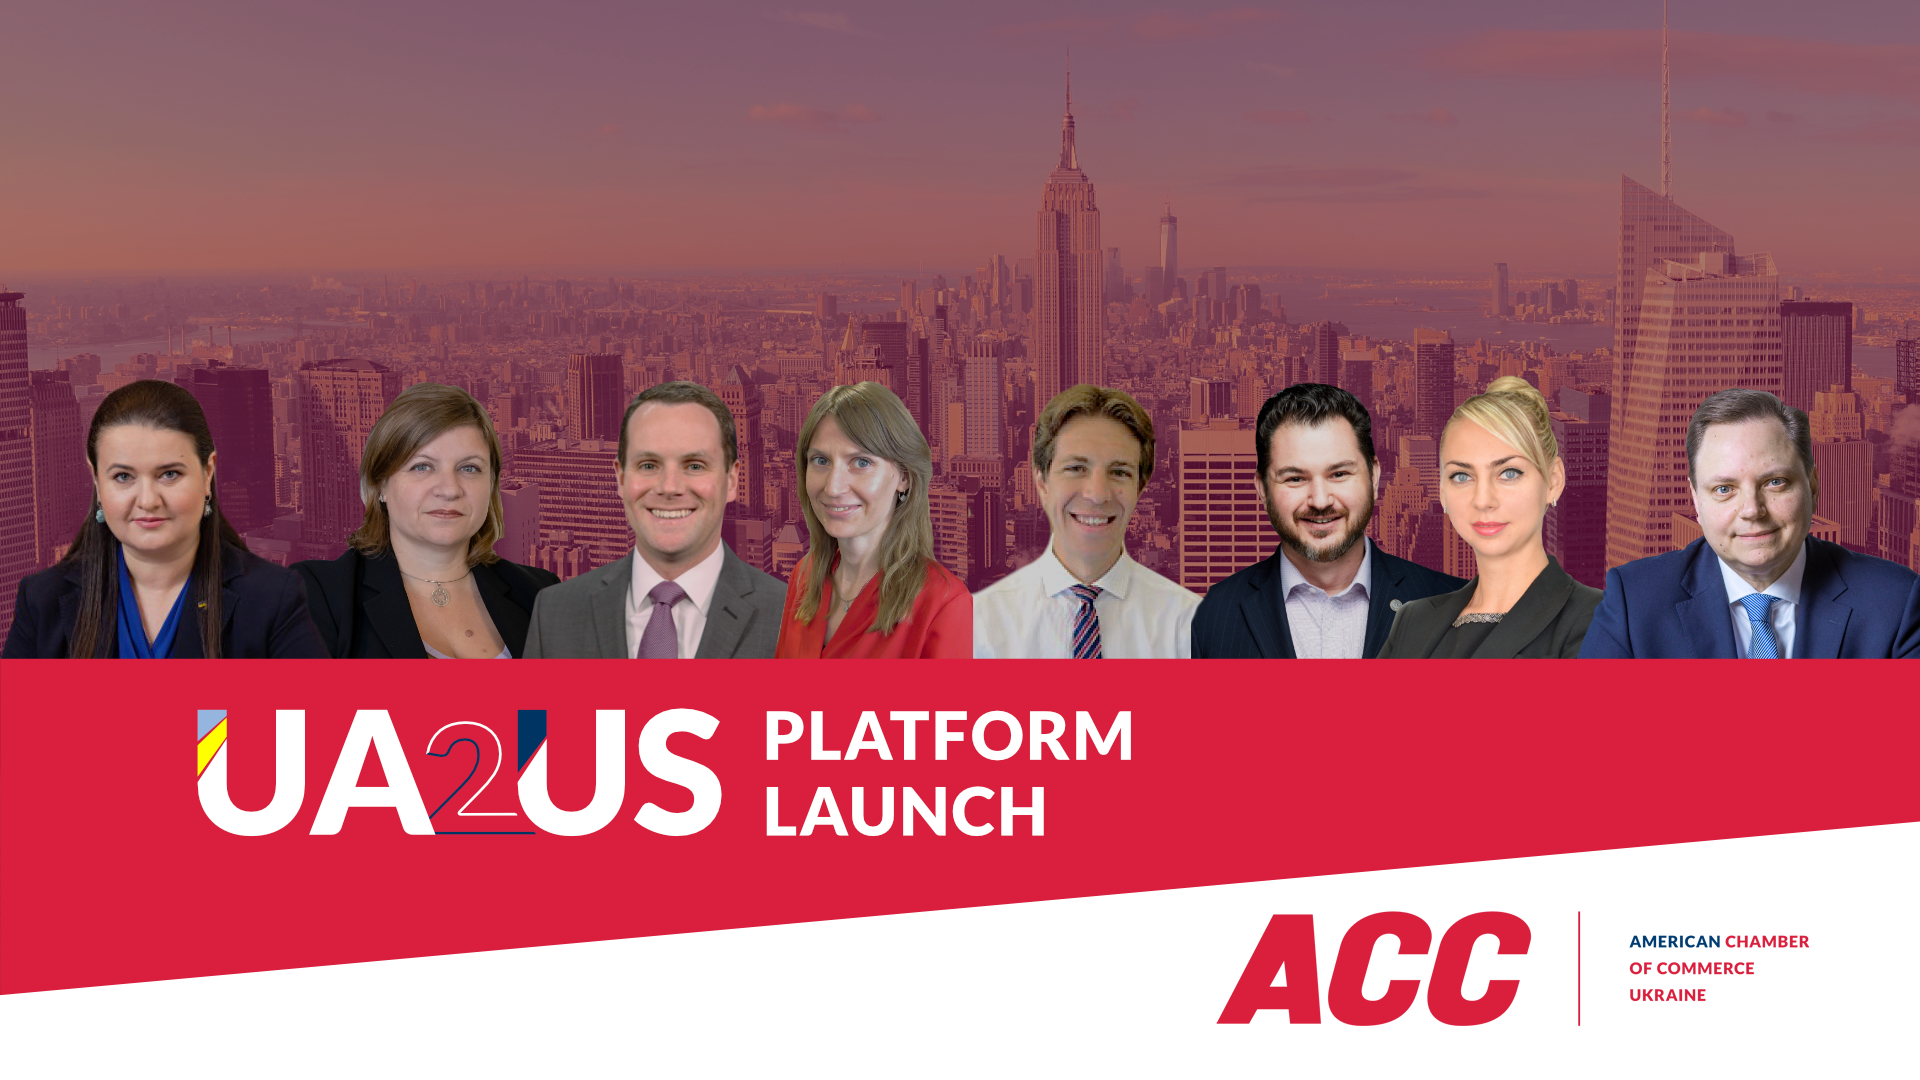 AmCham UA2US Platform Launch. Make Your First Business Steps with US